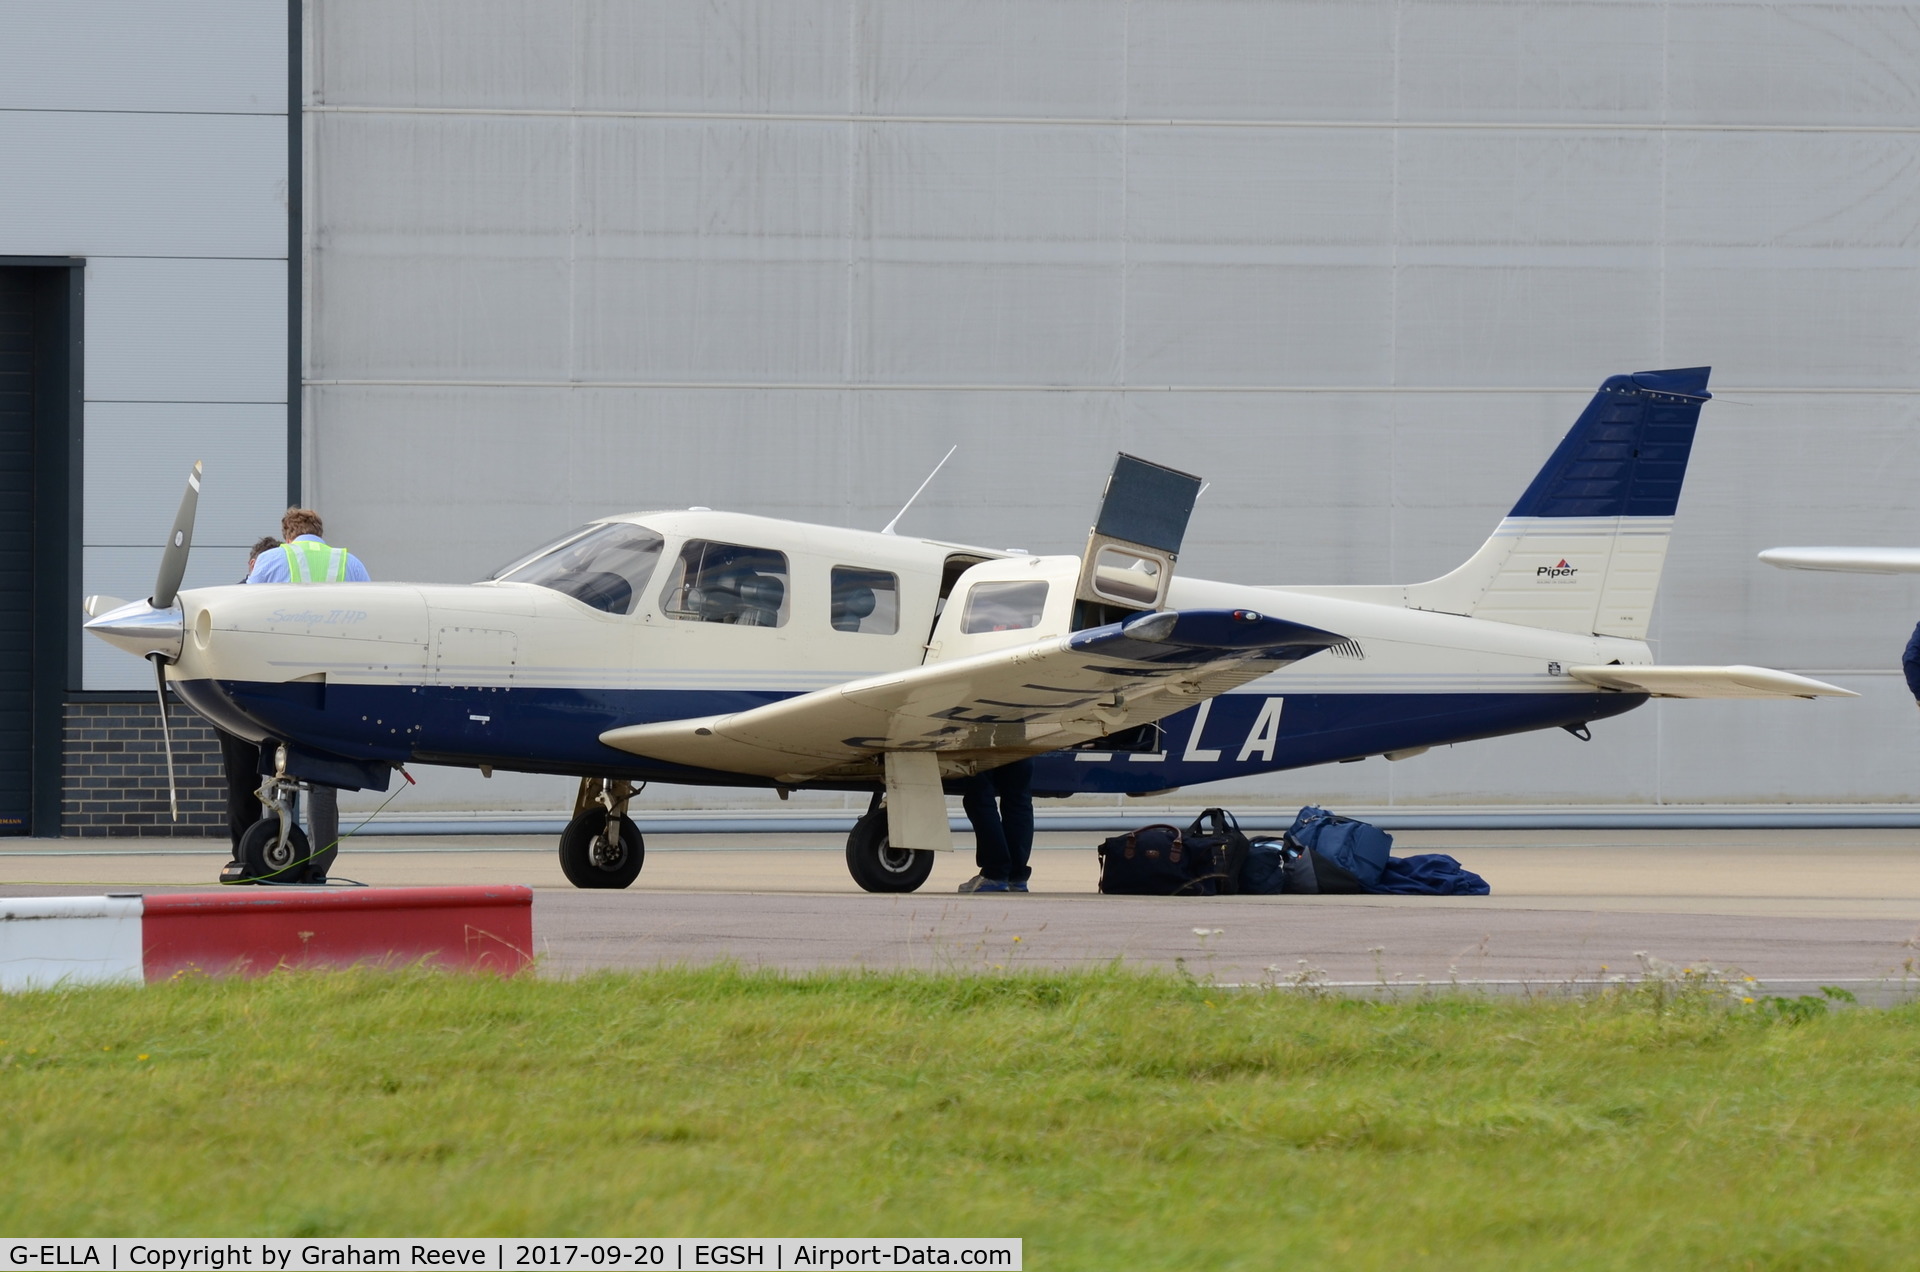 G-ELLA, 1996 Piper PA-32R-301 Saratoga SP C/N 32-46050, Just landed at Norwich.